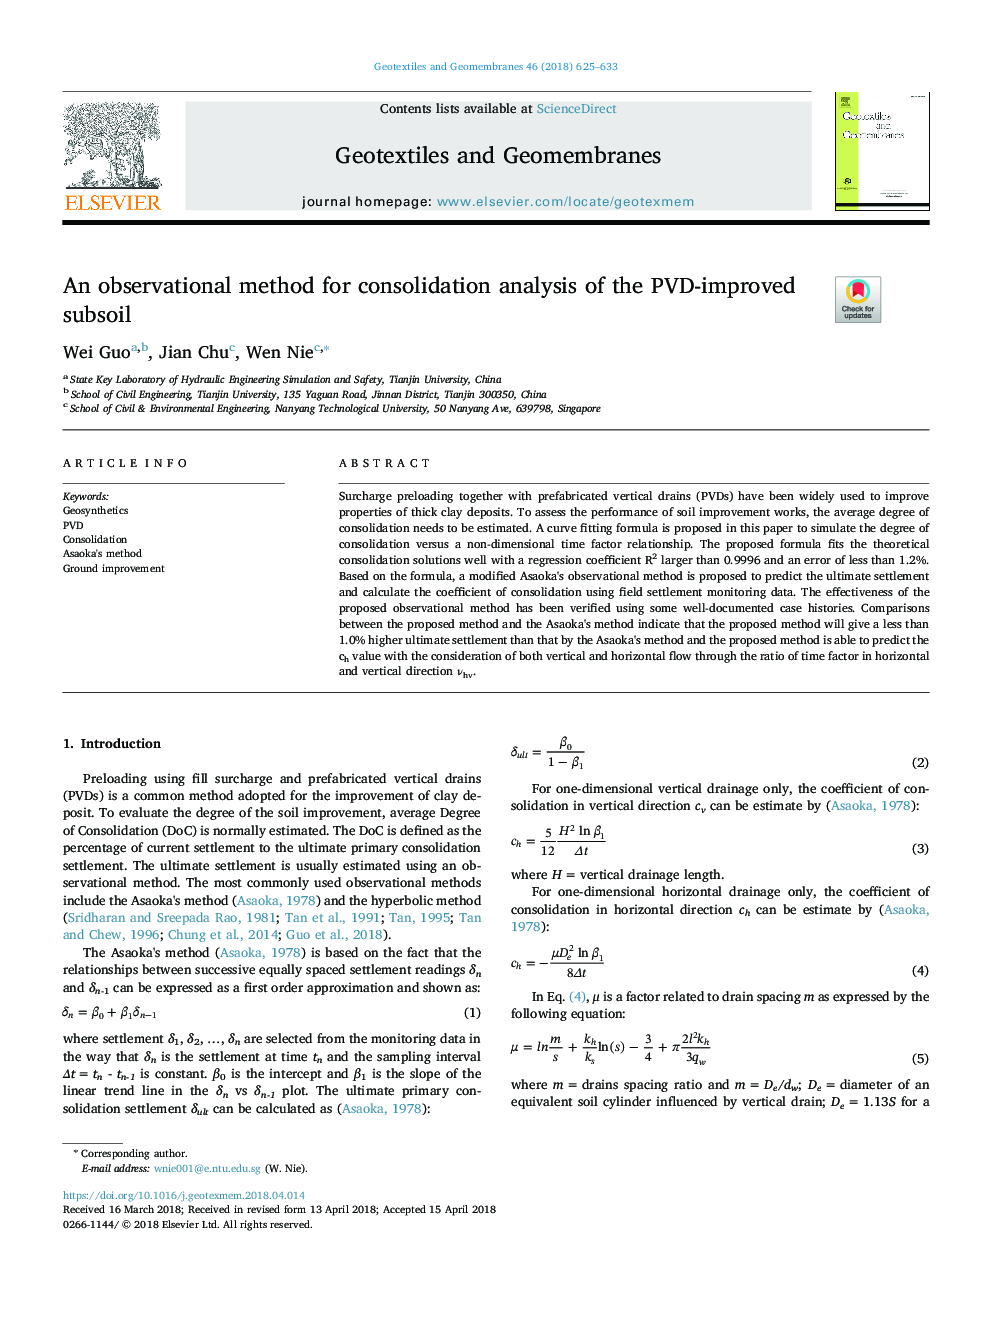 An observational method for consolidation analysis of the PVD-improved subsoil